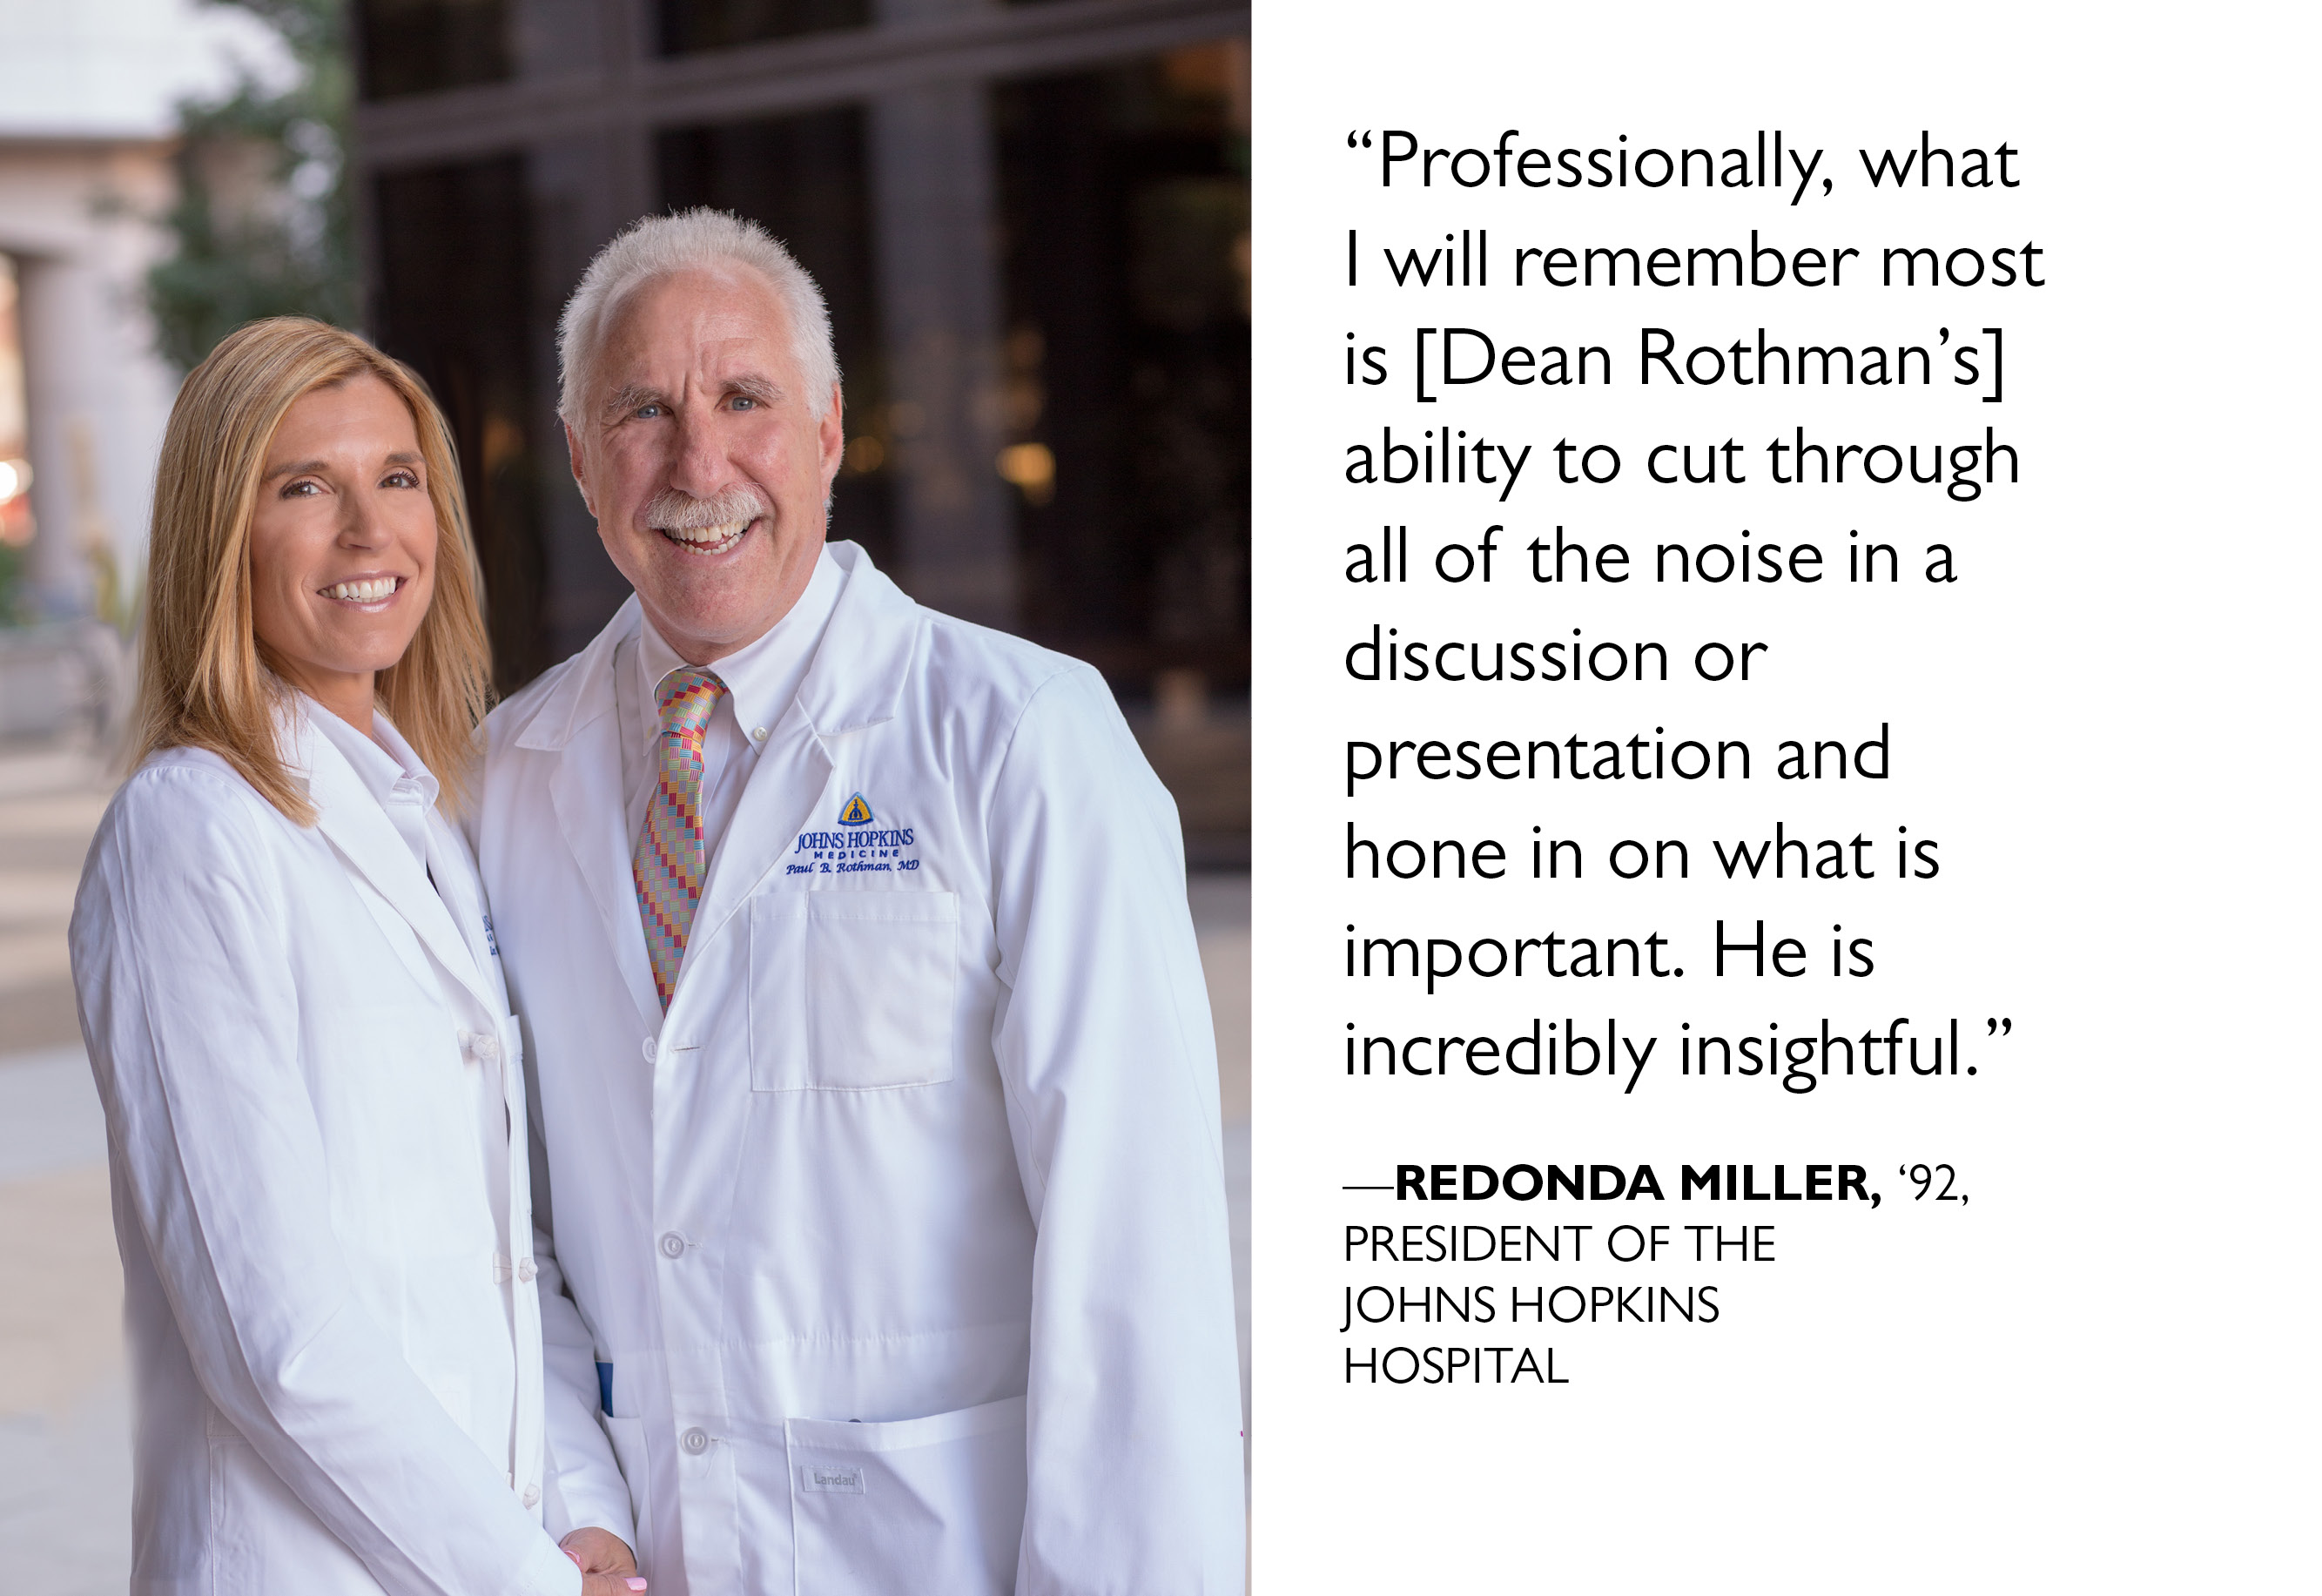 “ Professionally, what I will remember most is [Dean Rothman’s] ability to cut through all of the noise in a discussion or presentation and hone in on what is important. He is incredibly insightful.” — REDONDA MILLER 